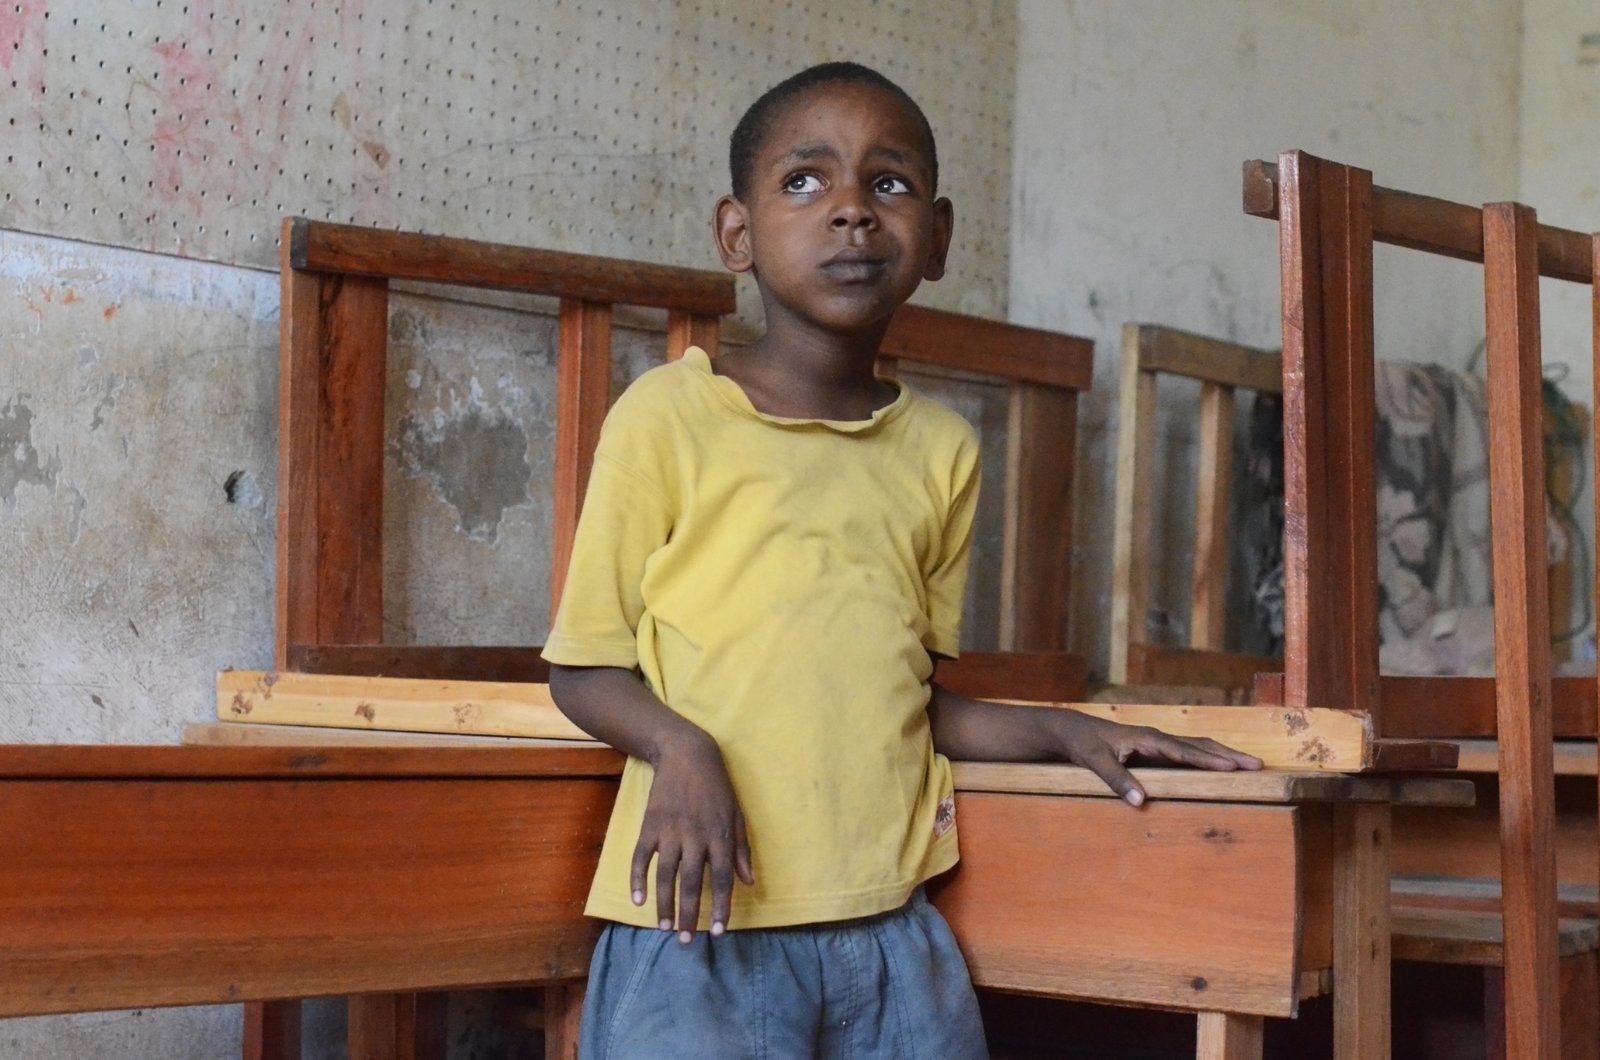 A boy in a yellow T-shirt glances upwards with an anxious expression. He leans on some school desks.